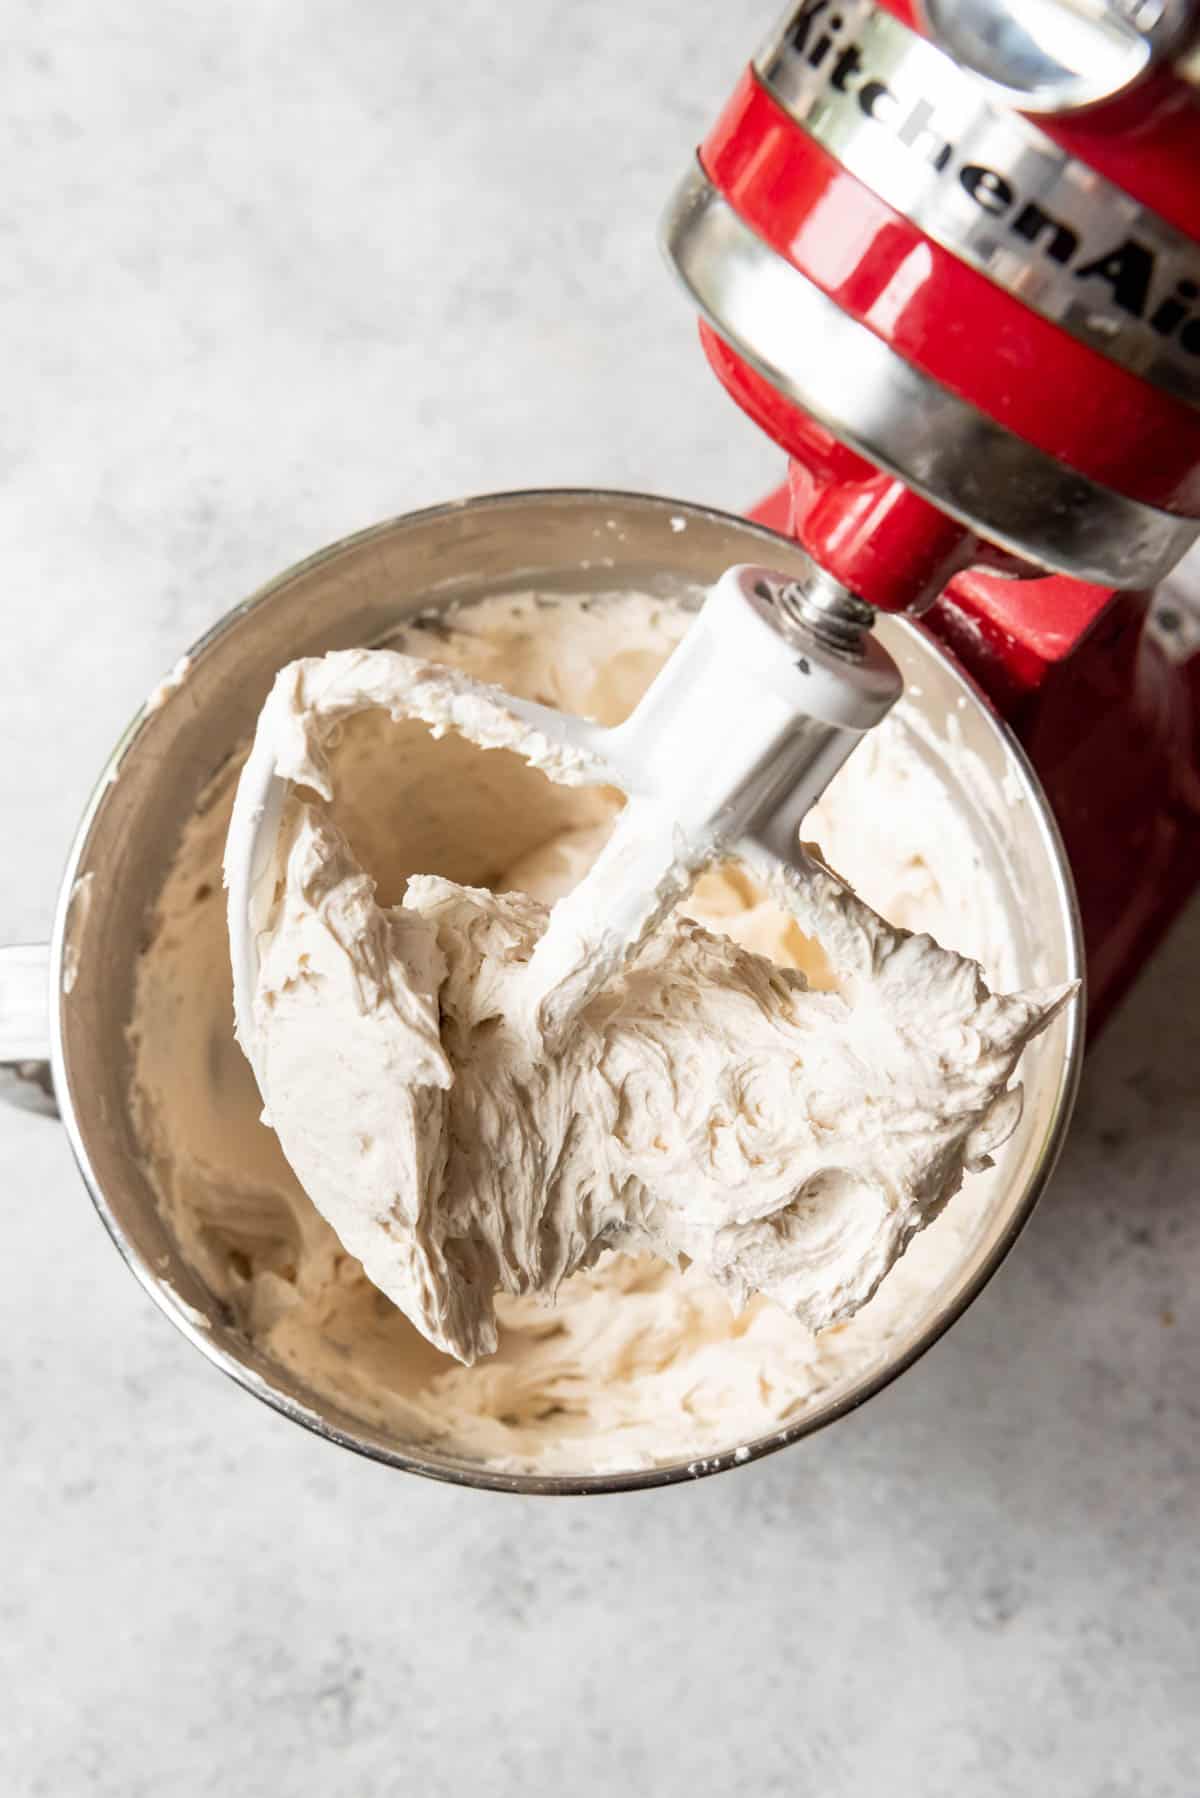 An image of Buttercream frosting getting mixed in a red kitchen aid stand up mixer.